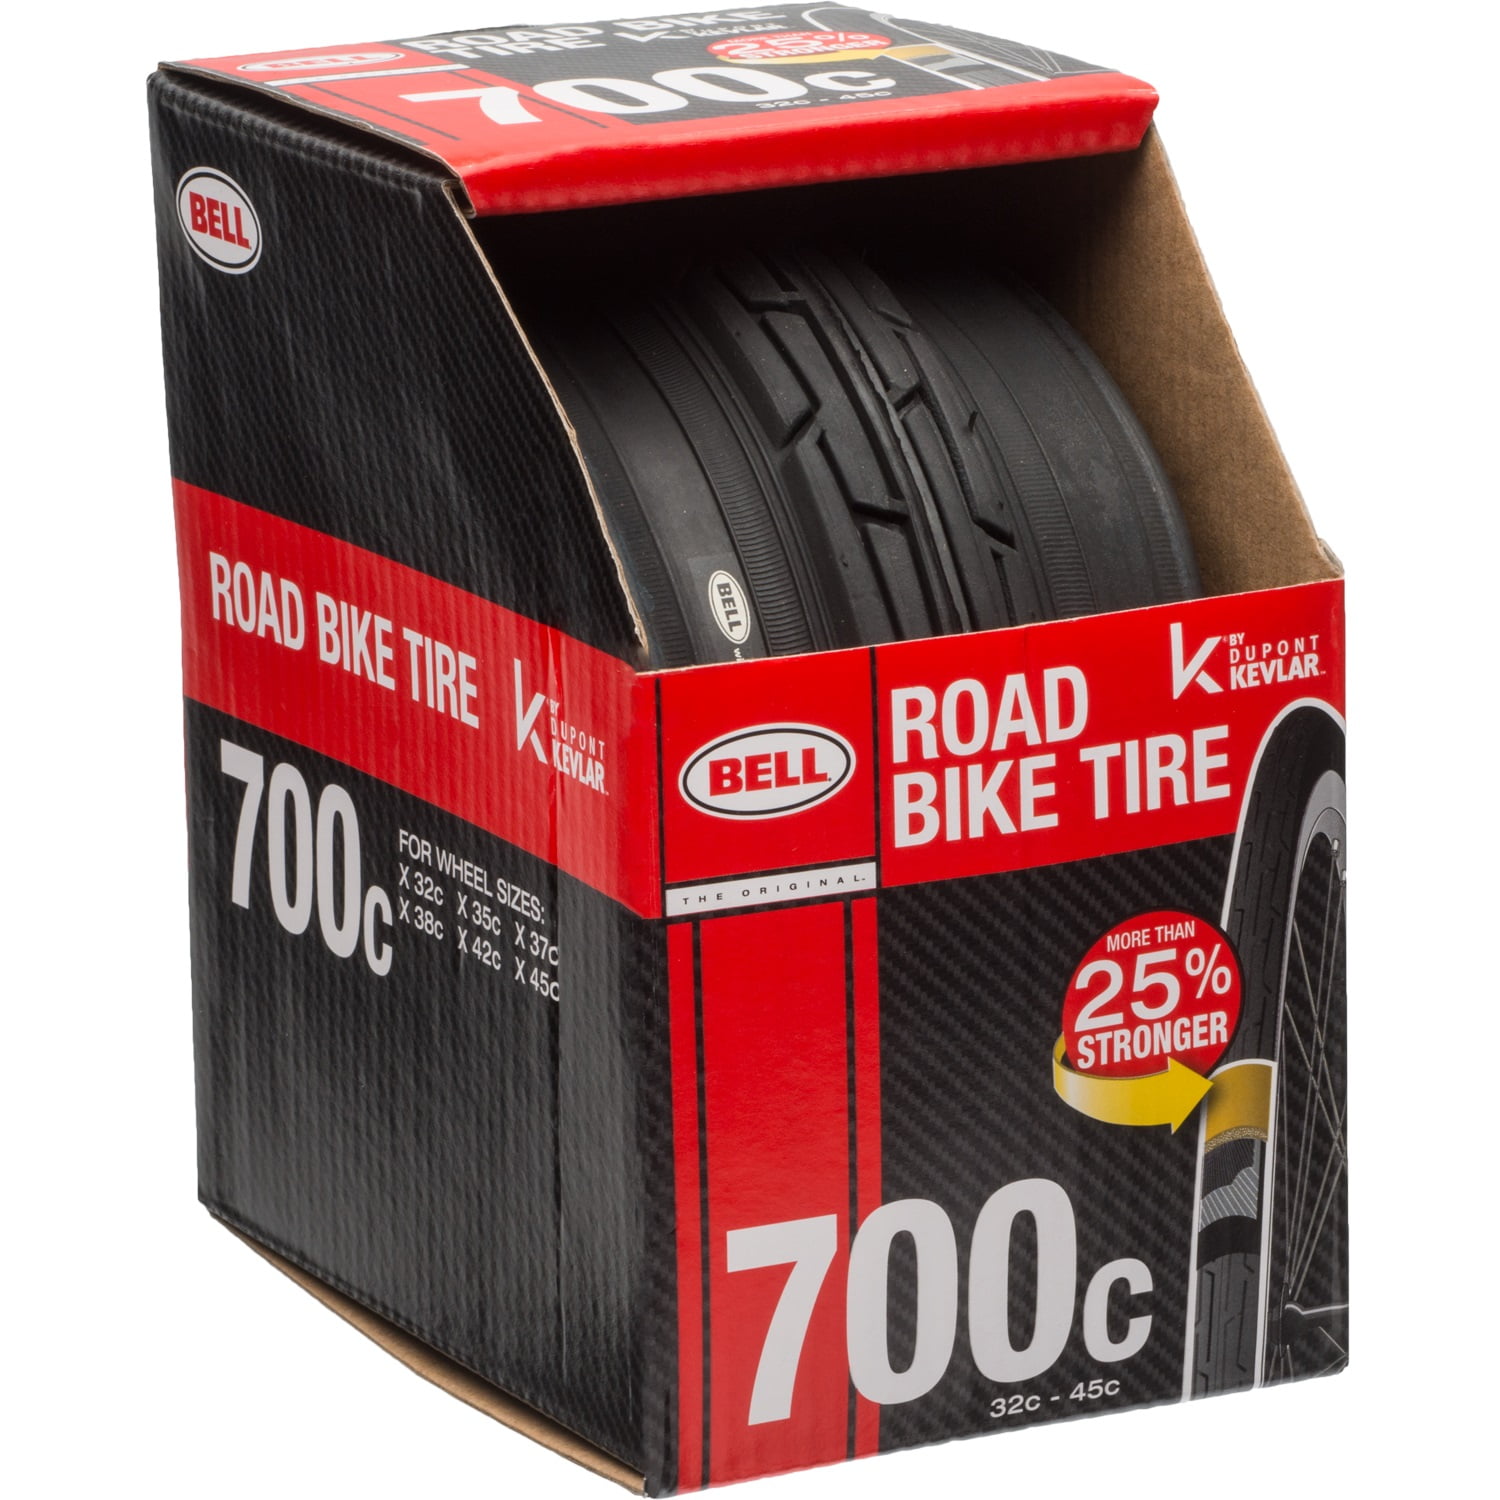 Details about   Bell Road Bike Tire 700c Flat Protection With DuPont Kevlar Platinum Series 